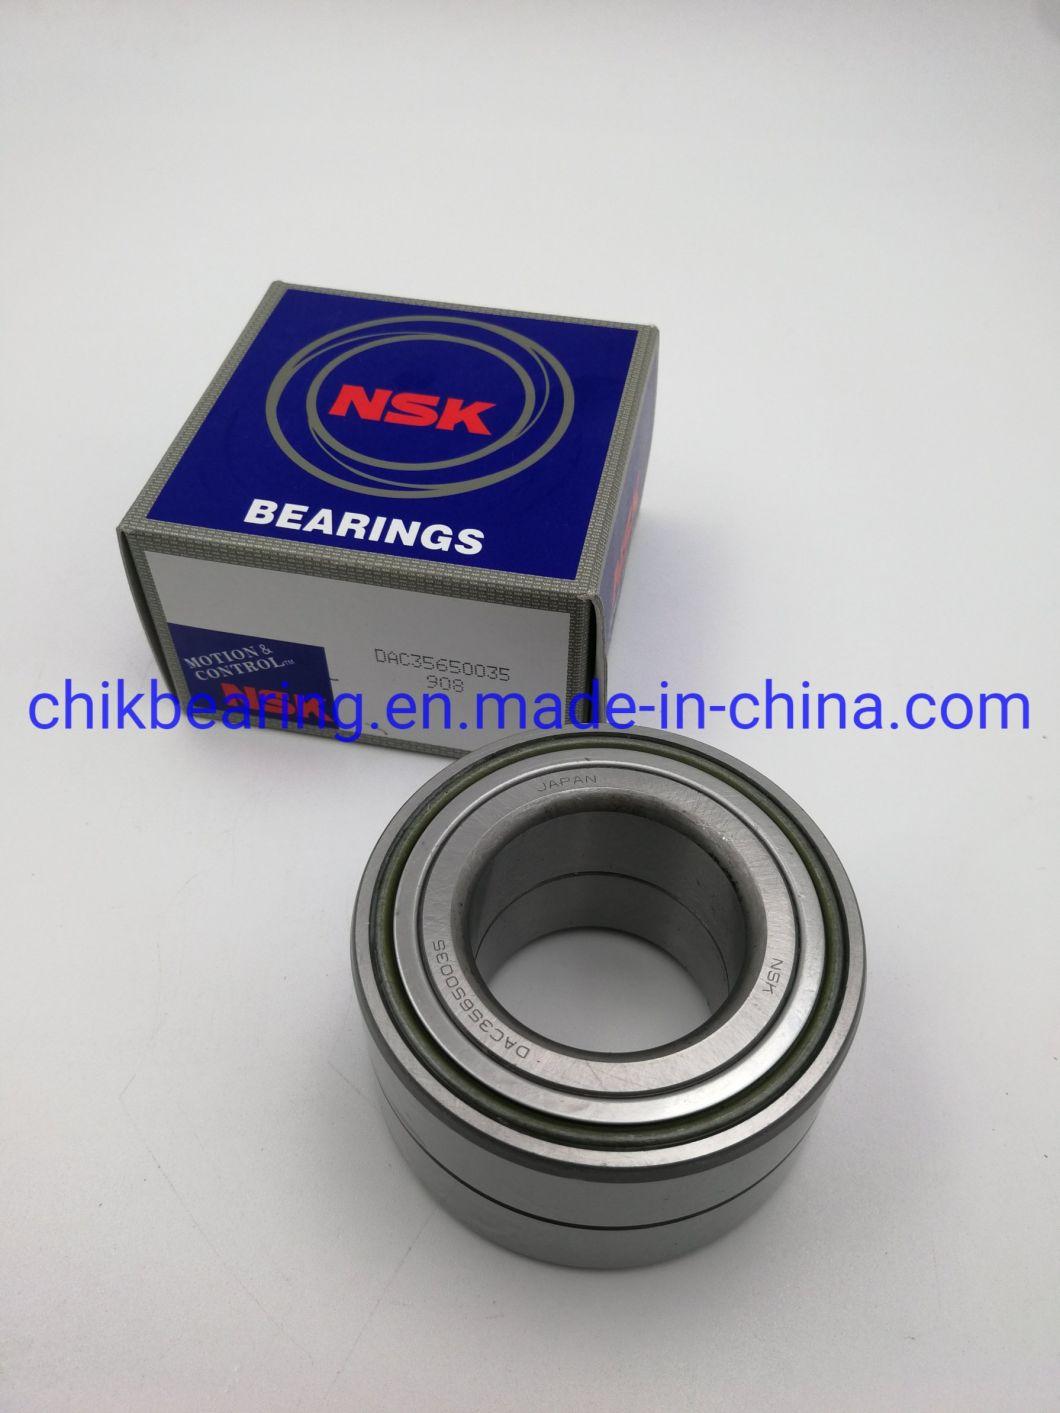 Wheel Hub Bearings Dac35650035zz Dac428236zz Used in Gearbox, Instrument, Motor, Electric Appliance, Internal Combustion Engine, Agriculture, Roller Skates